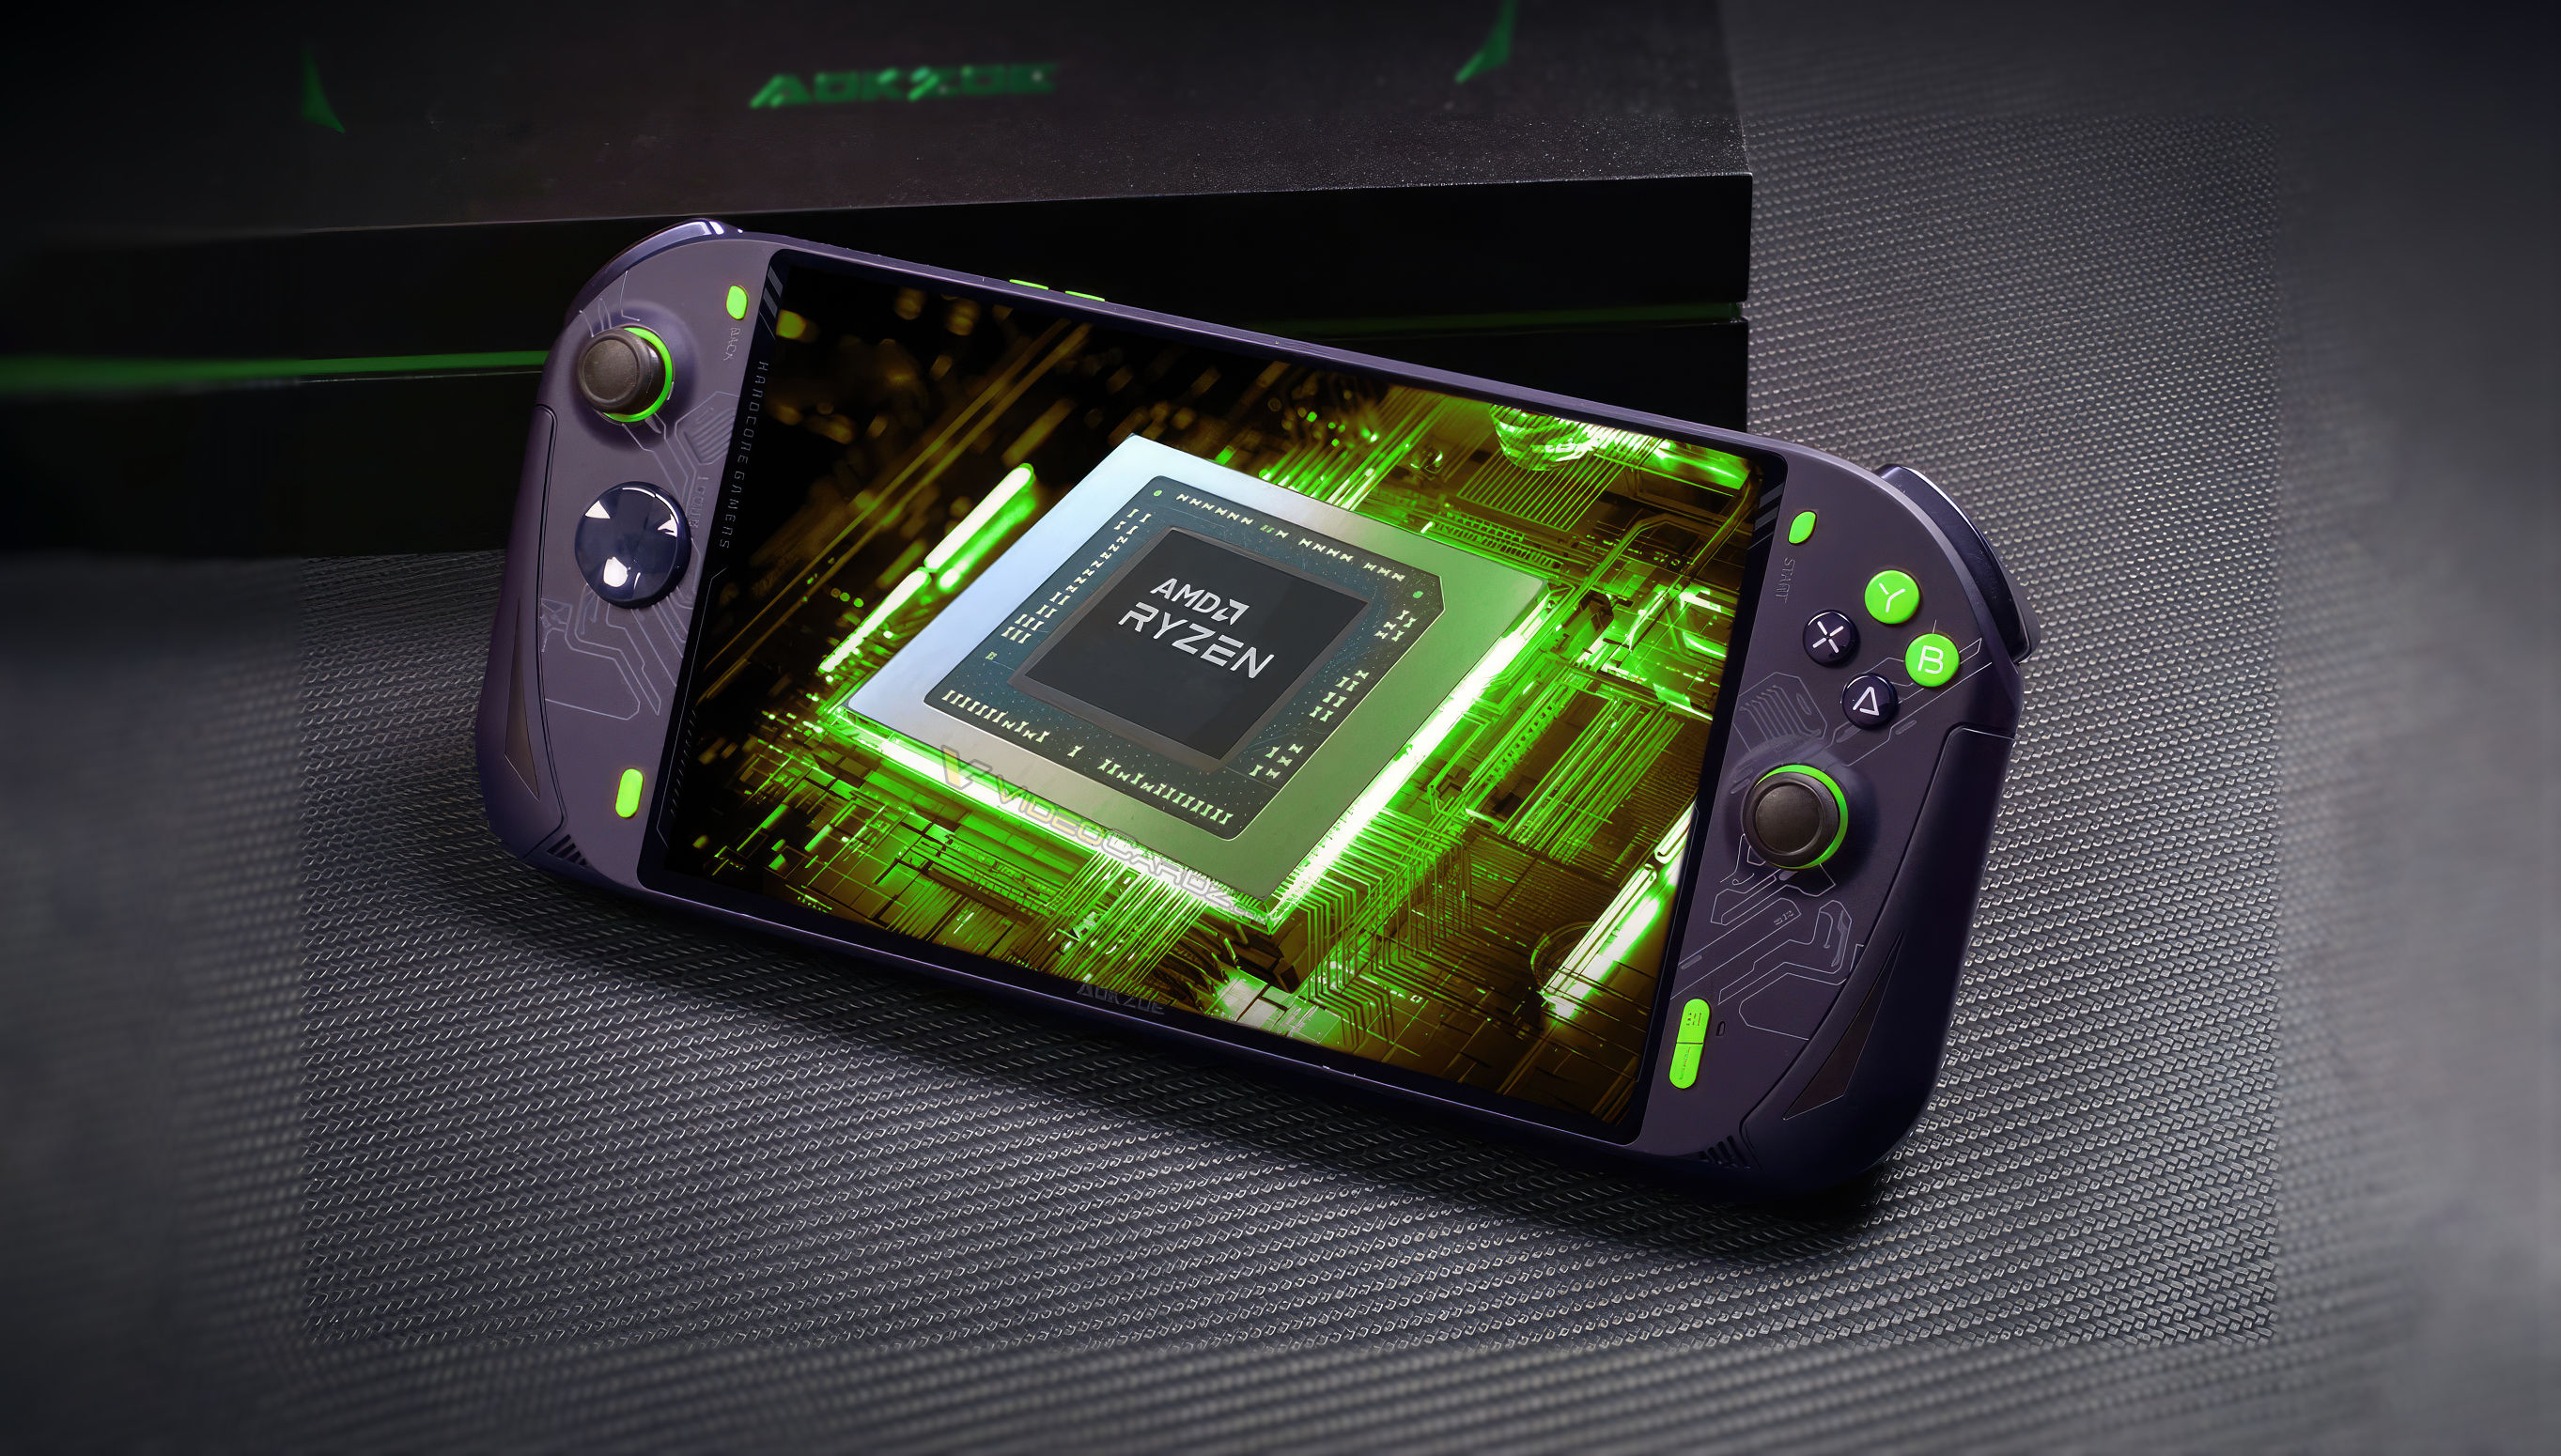 AYANEO: World's First 7nm Handheld Gaming Device